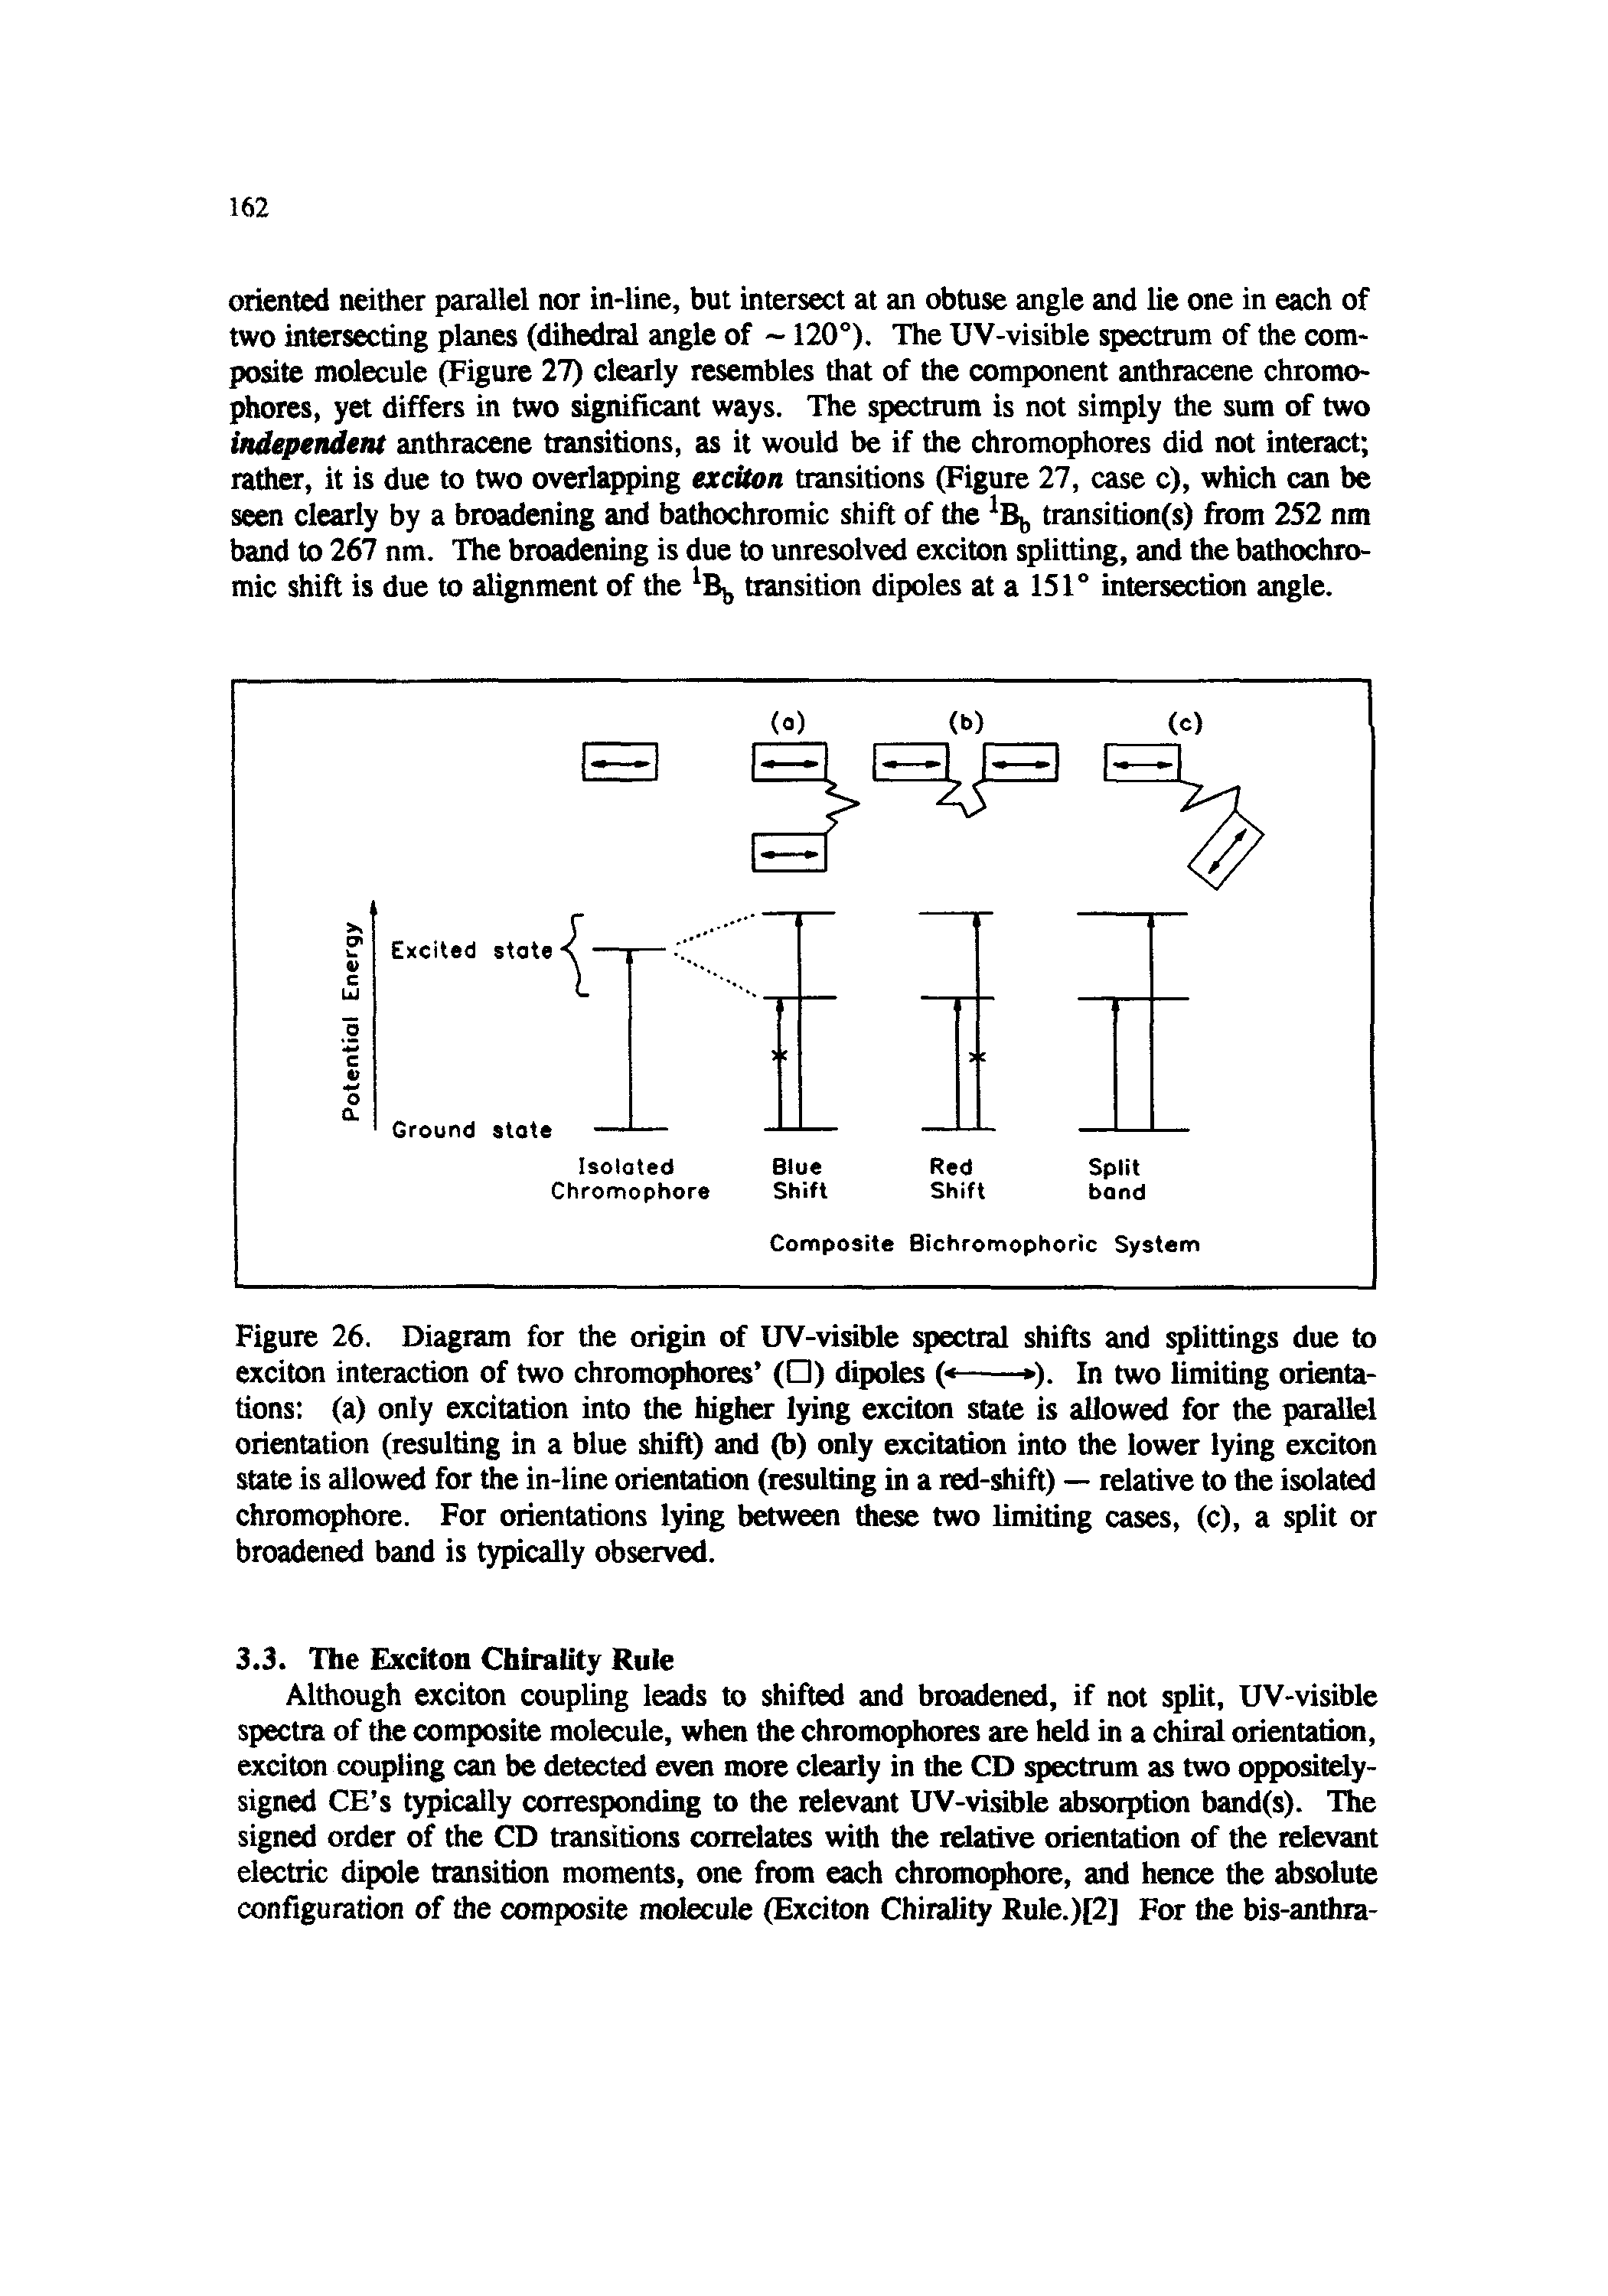 Figure 26. Diagram for the origin of UV-visible spectral shifts and splittings due to exciton interaction of two chromophores ( ) dipoles ( - ). In two limiting orienta-...